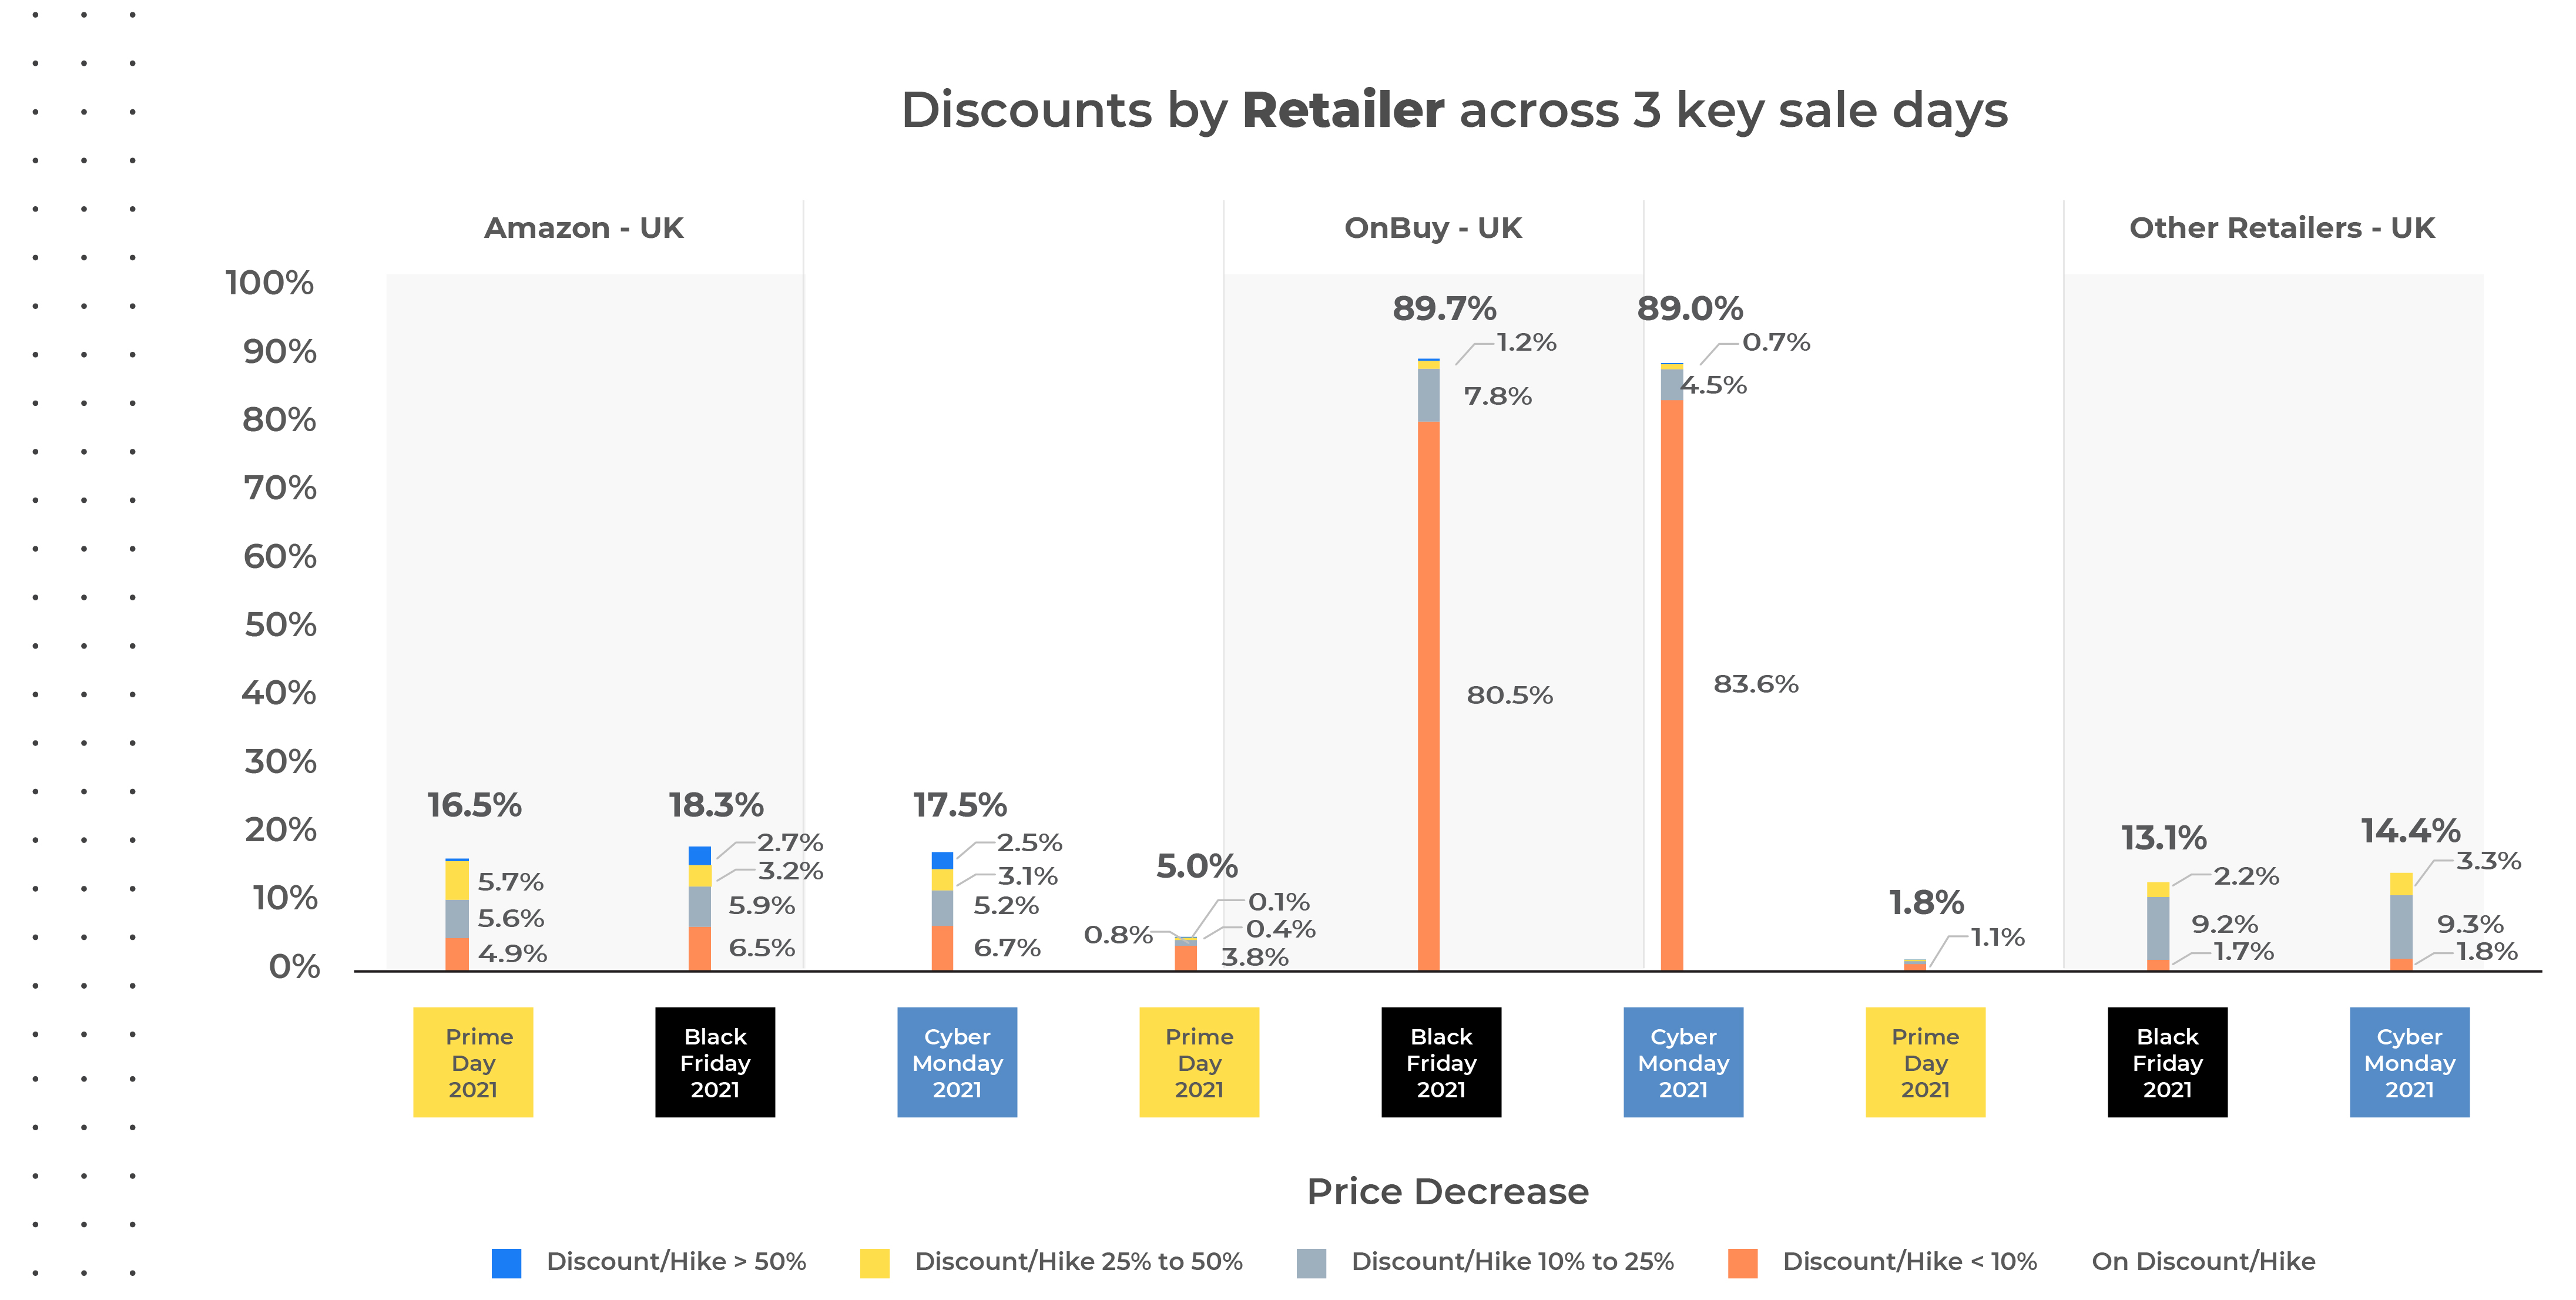 Discounts by Retailer